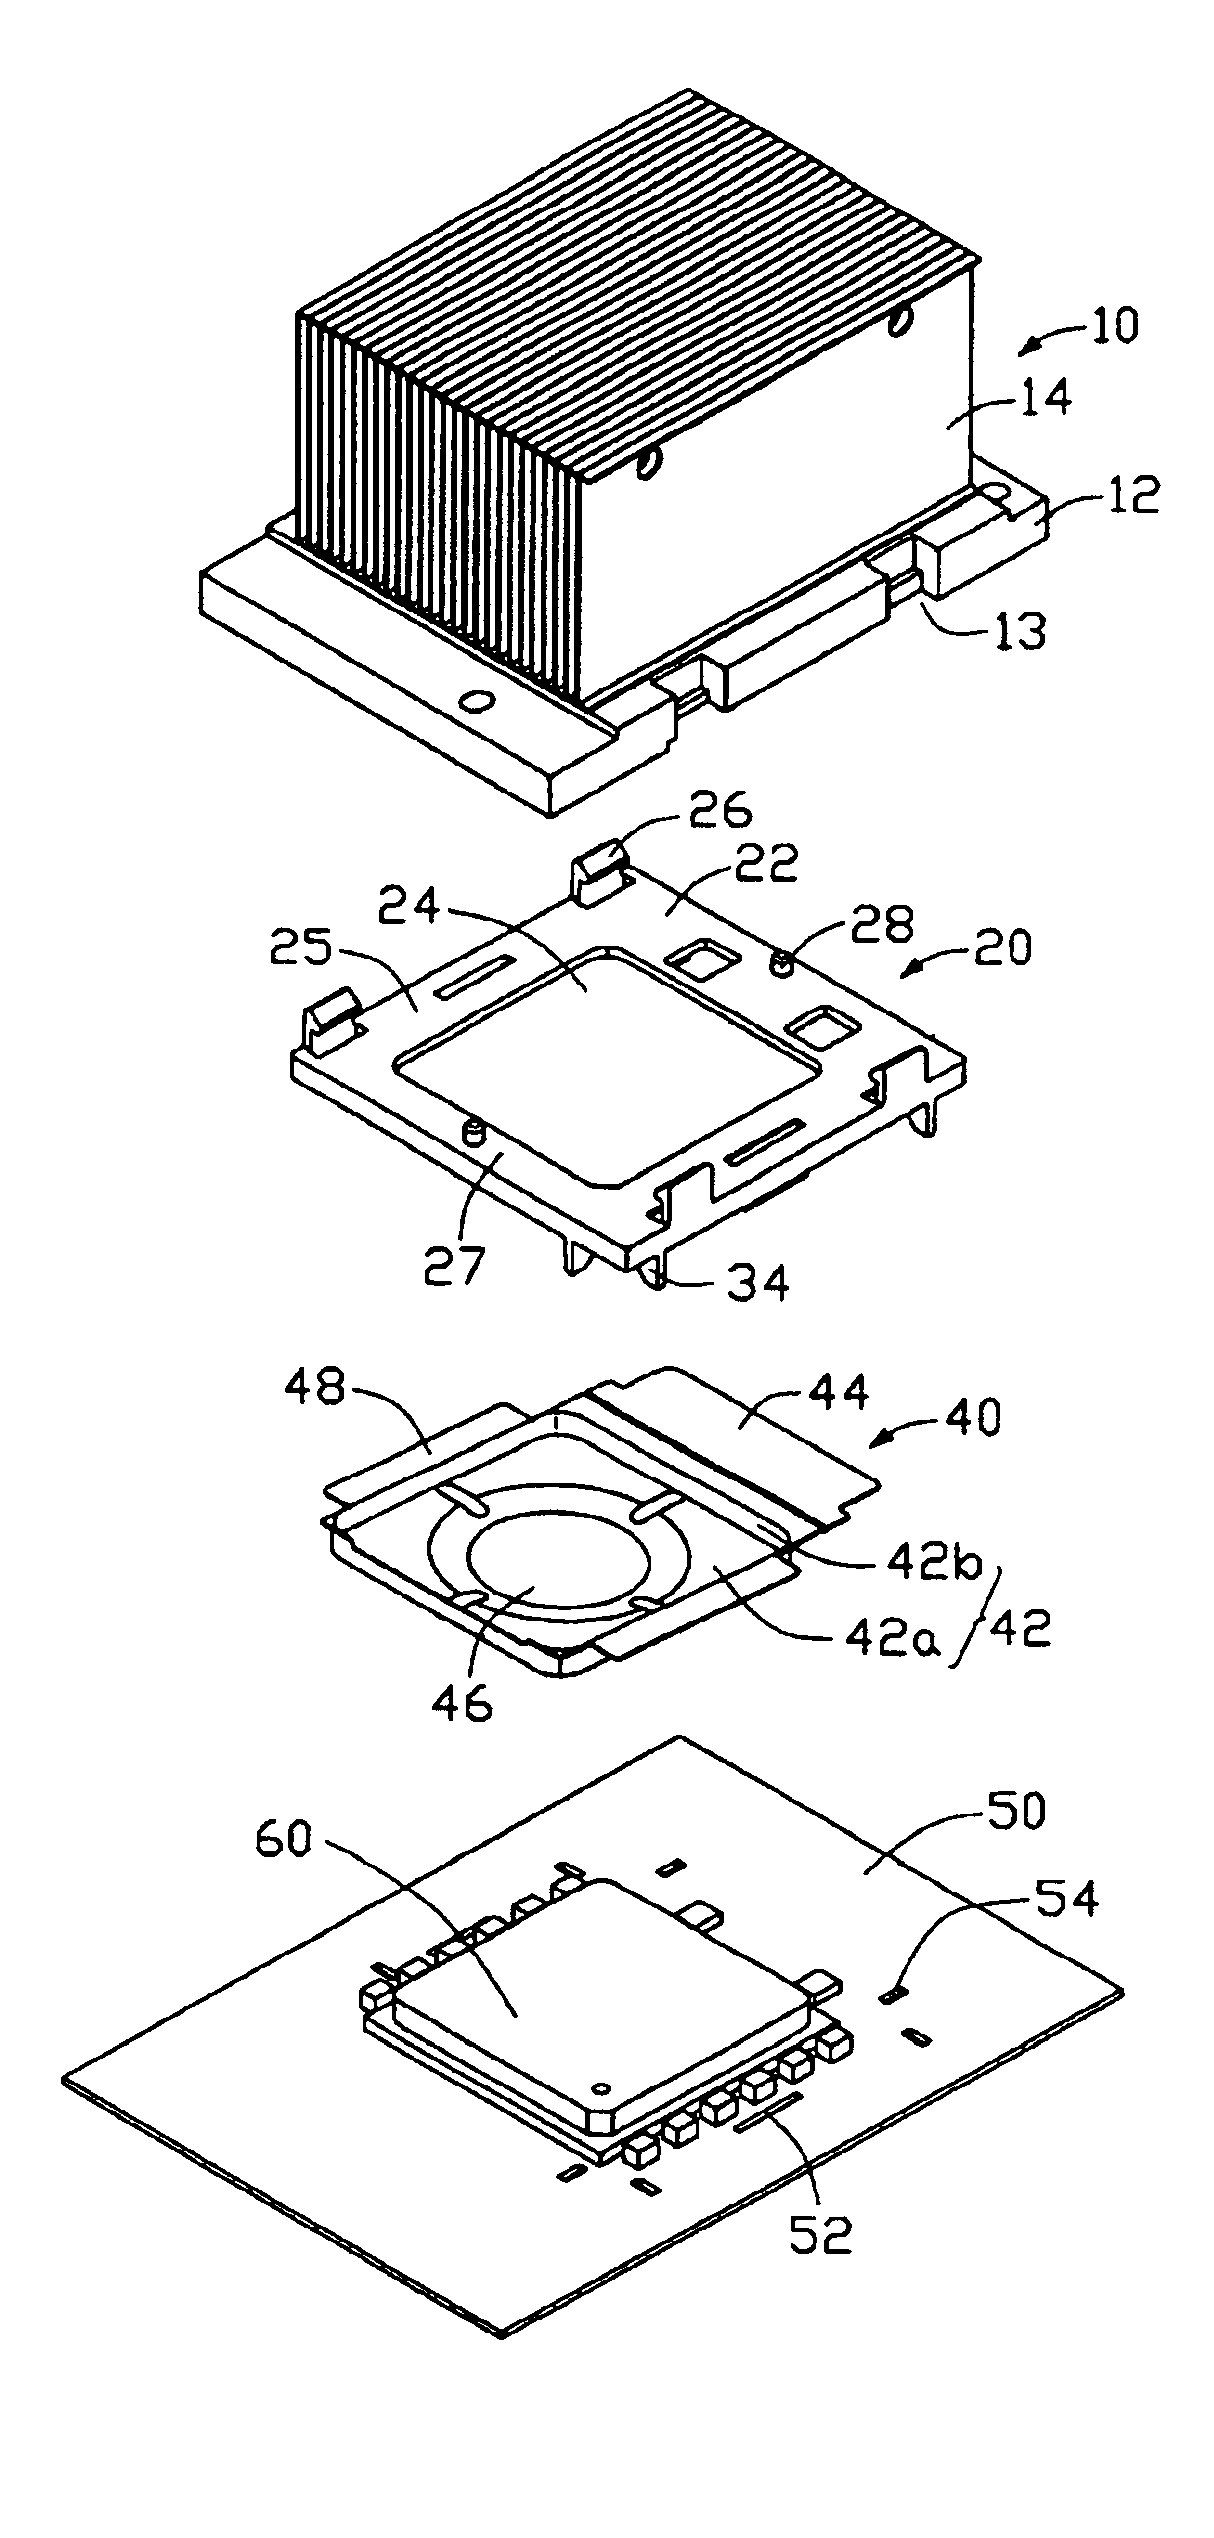 Heat sink assembly incorporating mounting frame